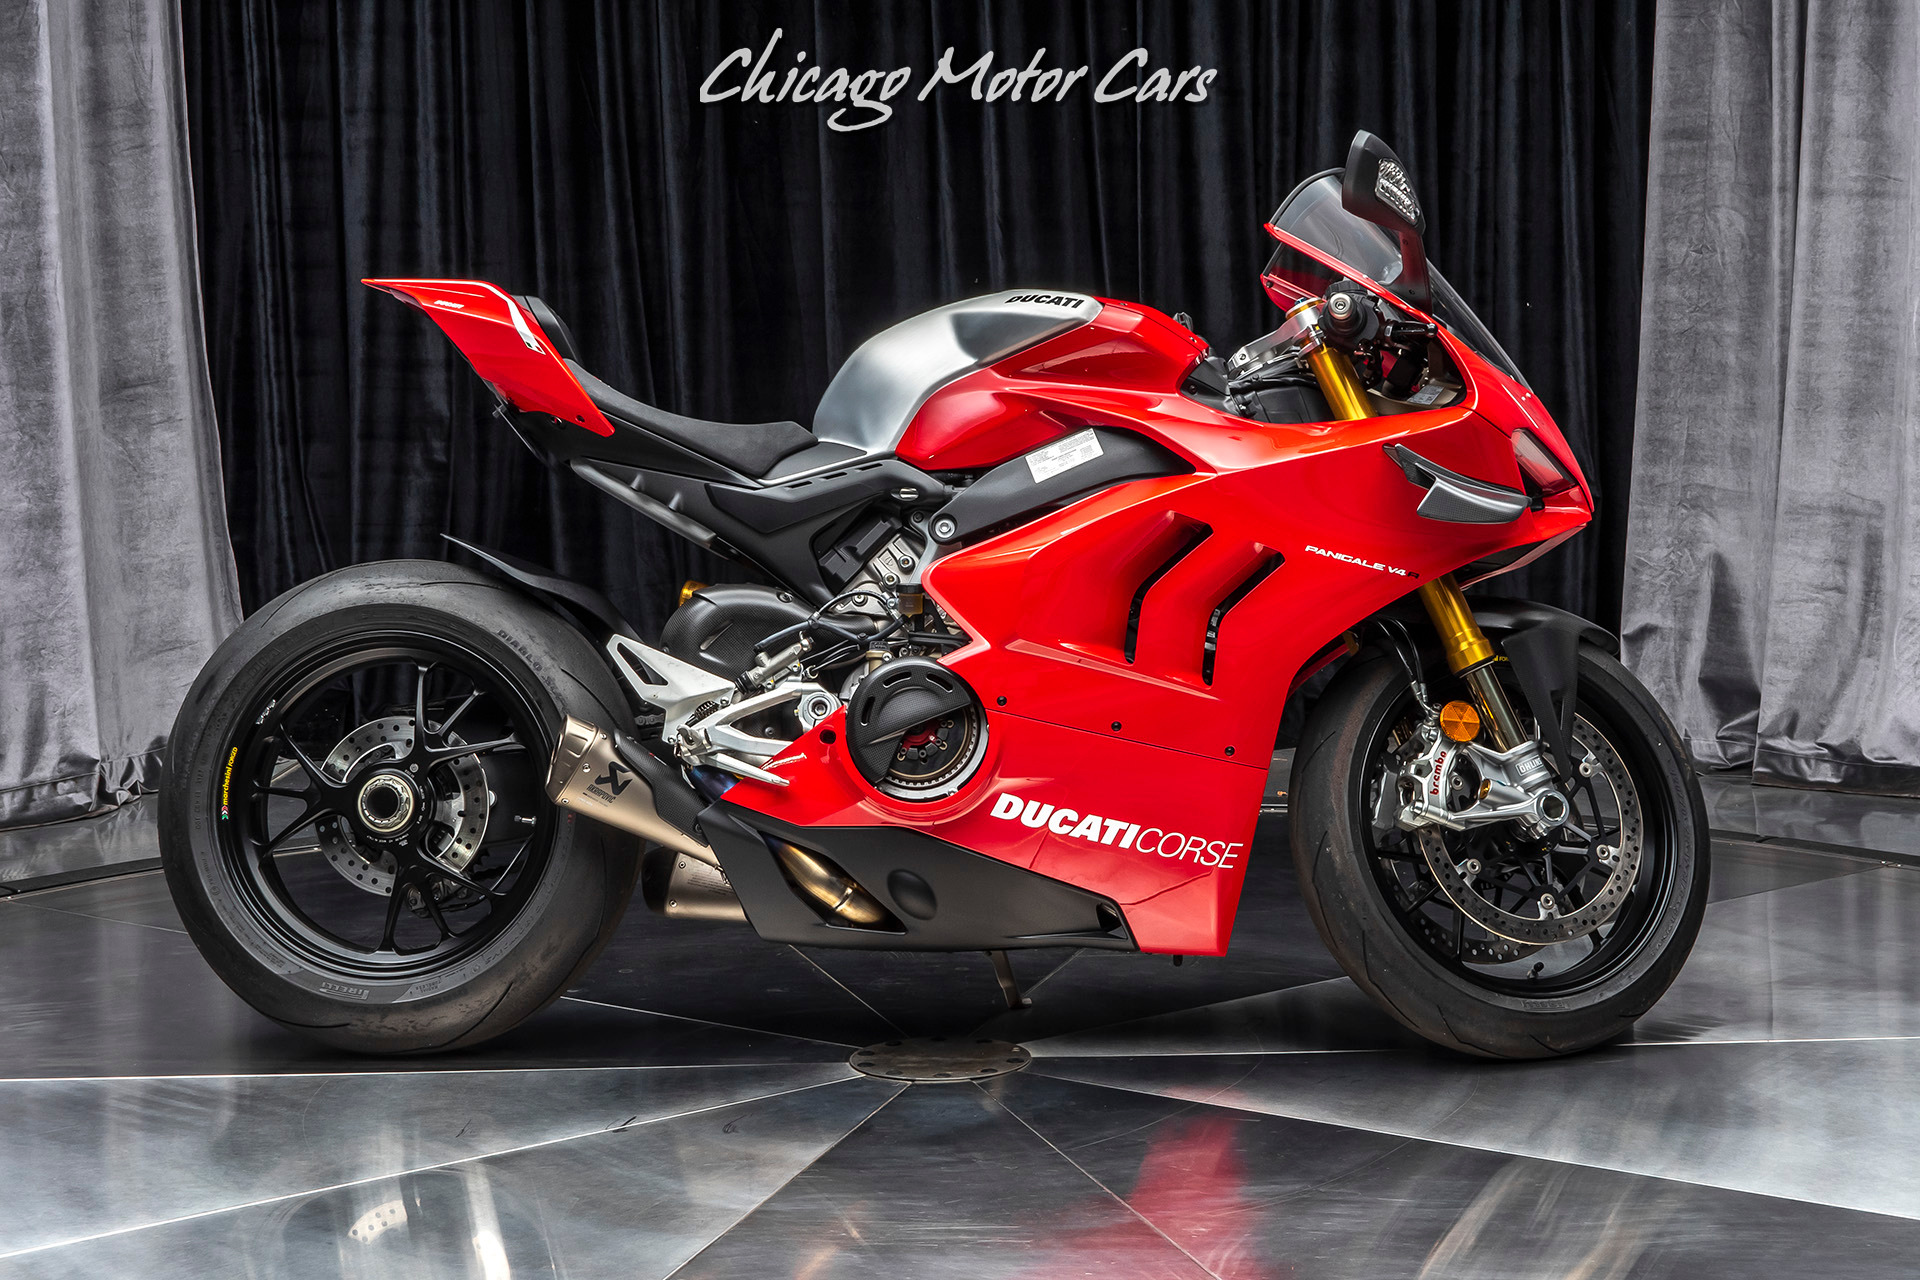 Used 2019 Ducati Panigale V4 R Motorcycle With Racing Kit 234 Hp 47k Invested For Sale Special Pricing Chicago Motor Cars Stock 16122b